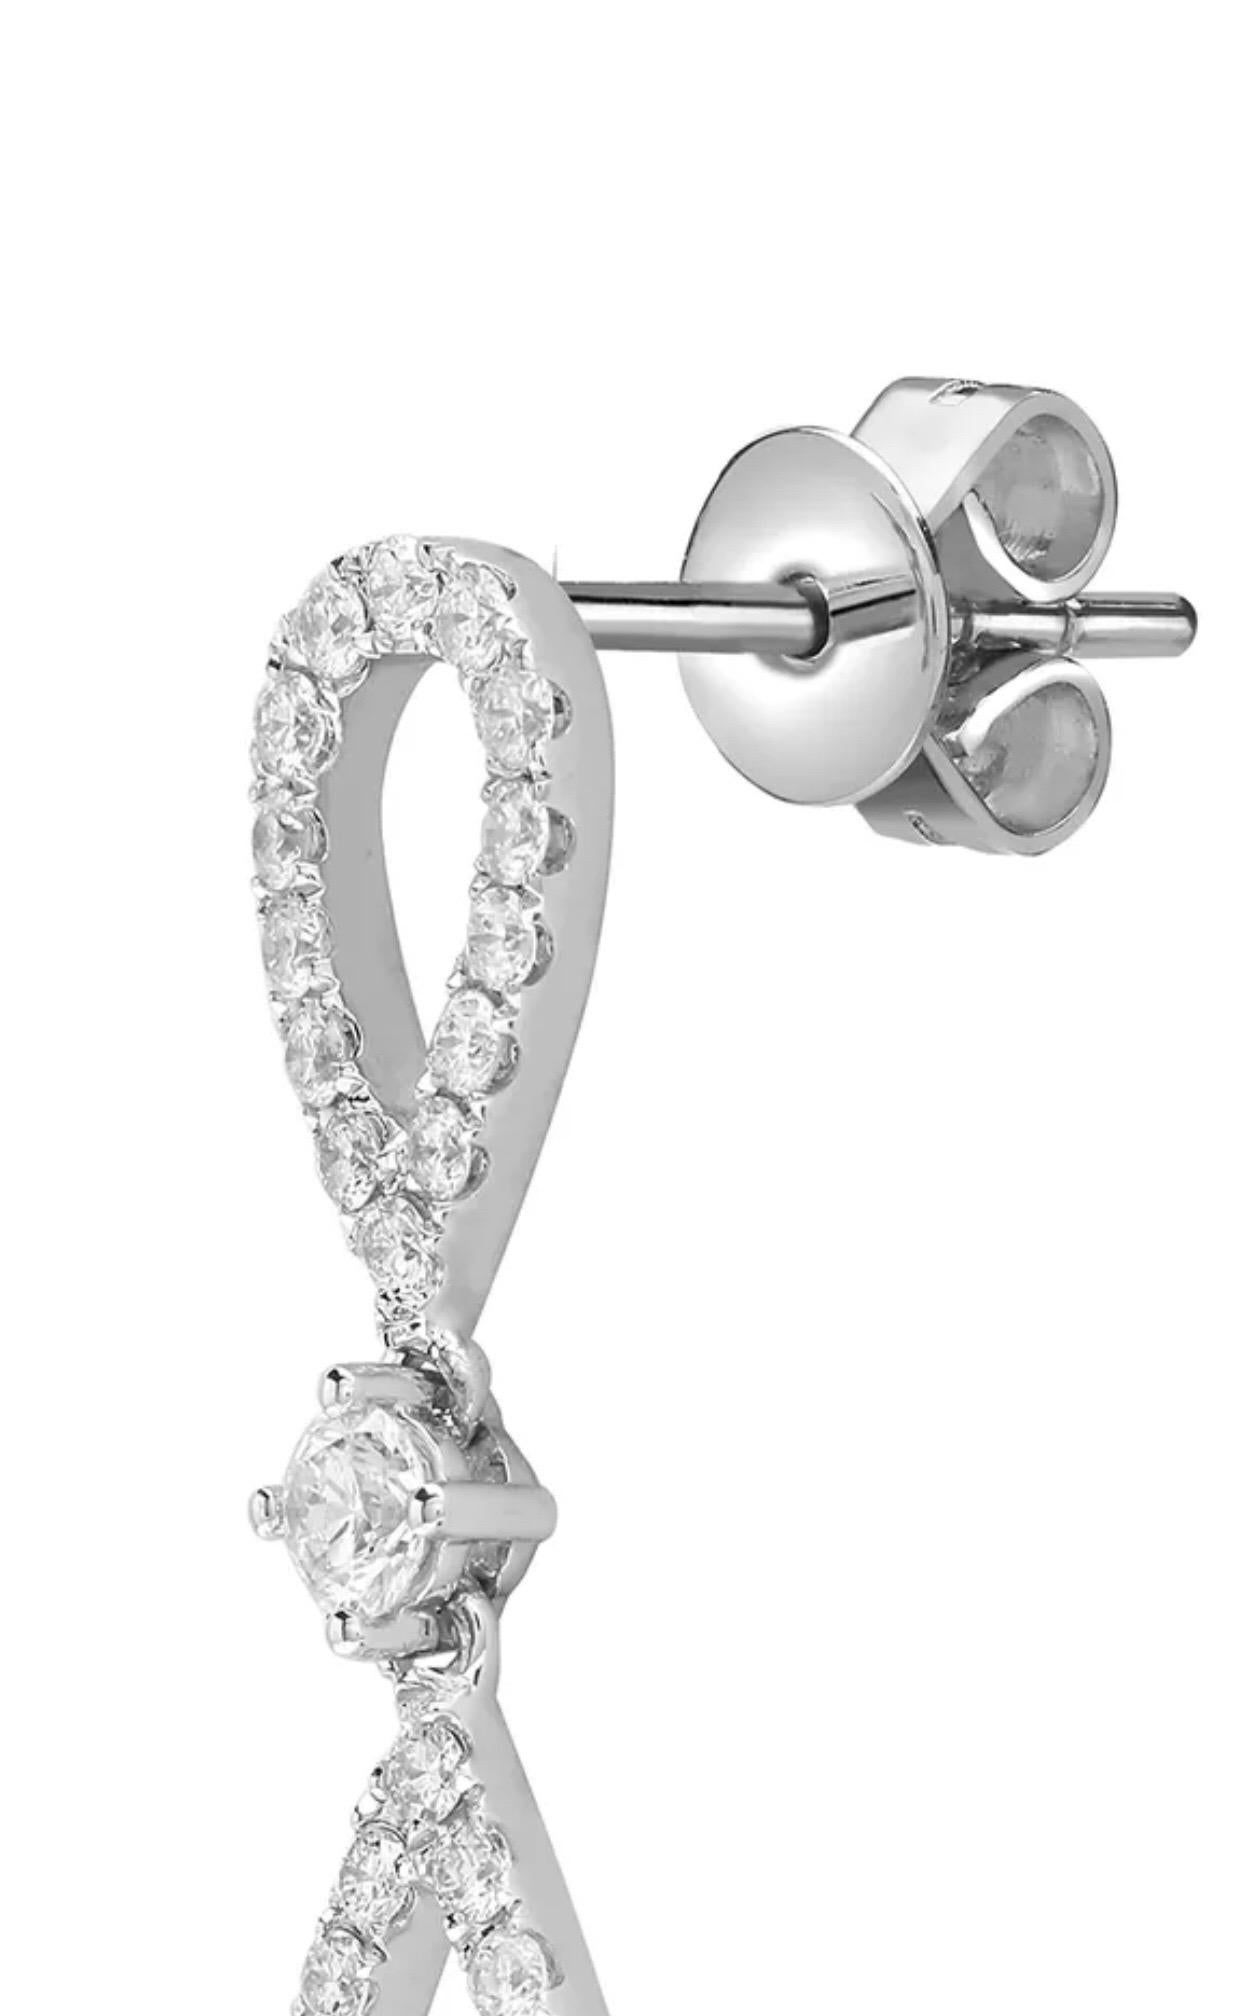 Elegant double pear shape single line connected with a round brilliant cut diamond to create a modern infinity style drops set in 18 karat white gold. Hand finished with an impressive 1 carat diamond total weight, white colour G and SI clarity, each